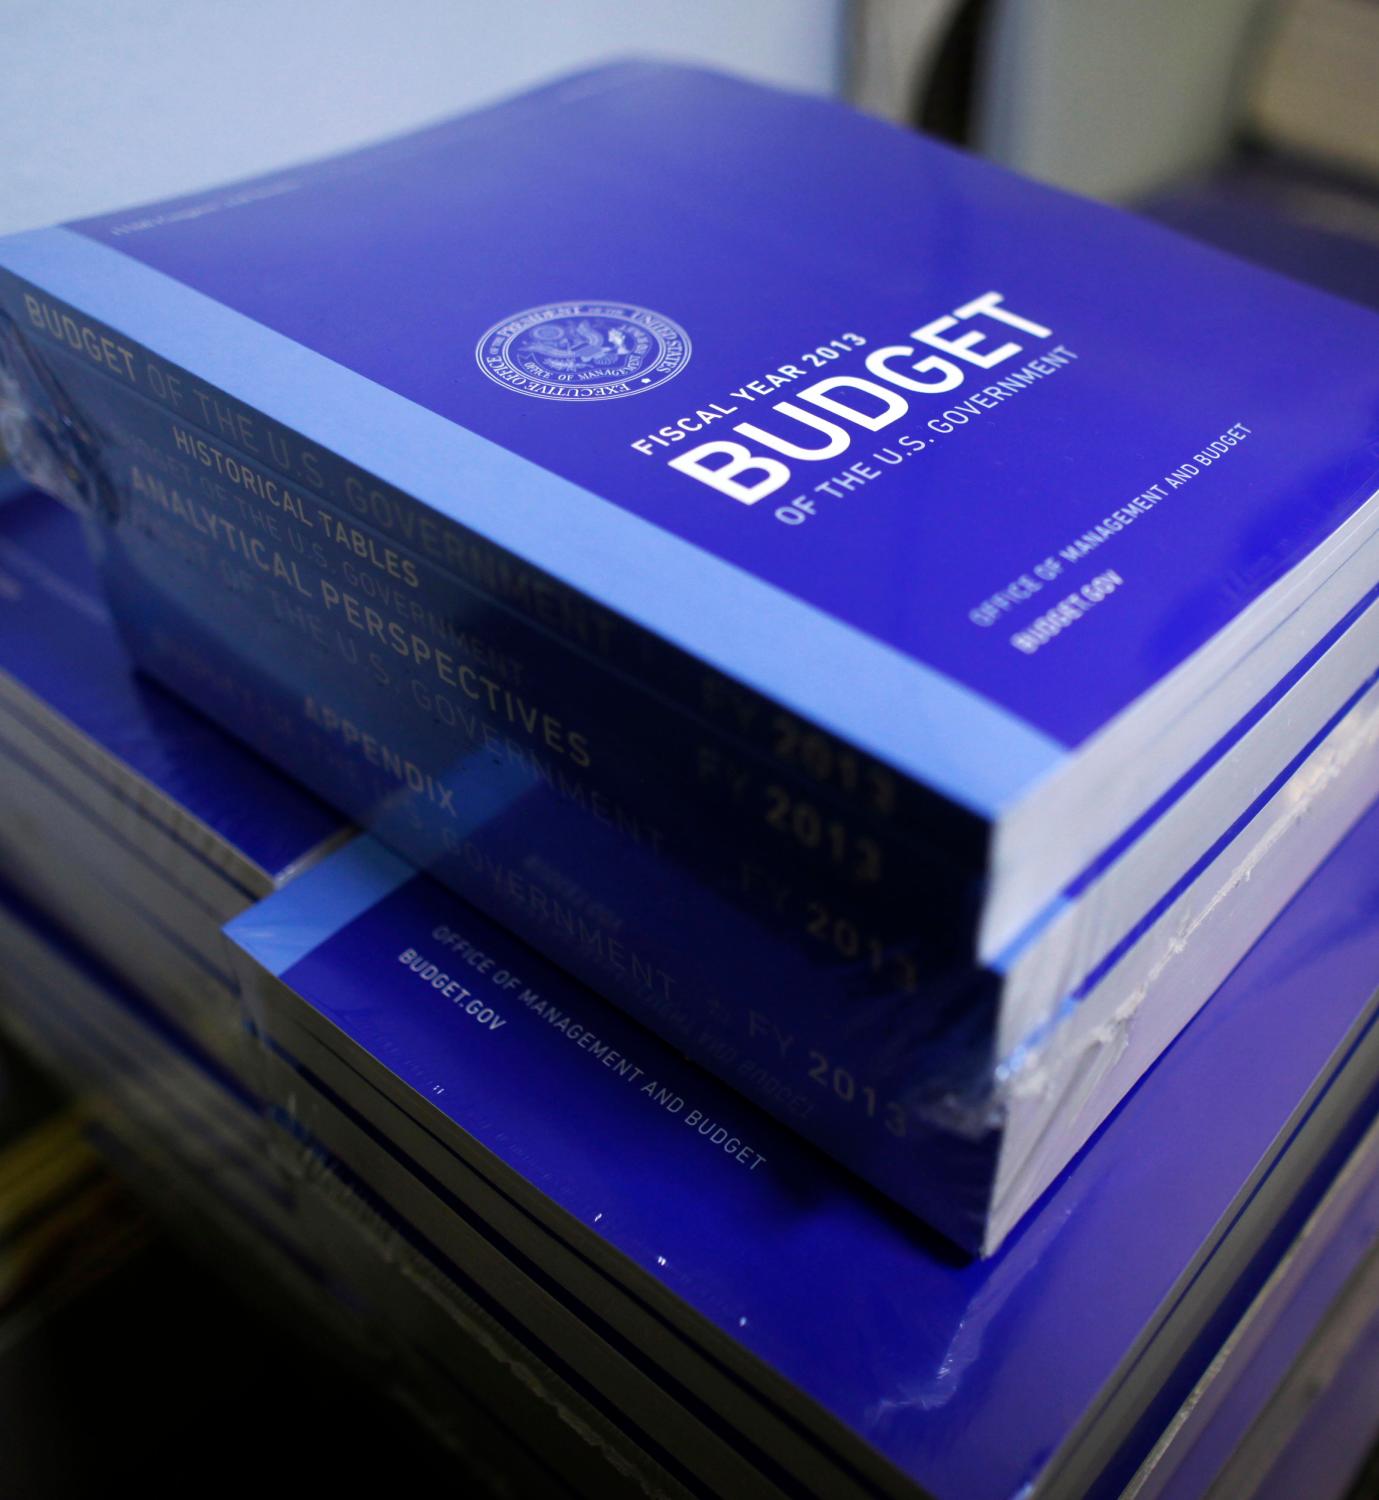 Copies of U.S. President Barack Obama's Fiscal Year 2013 budget are seen stacked on the floor of the House Budget Committee room on Capitol Hill in Washington